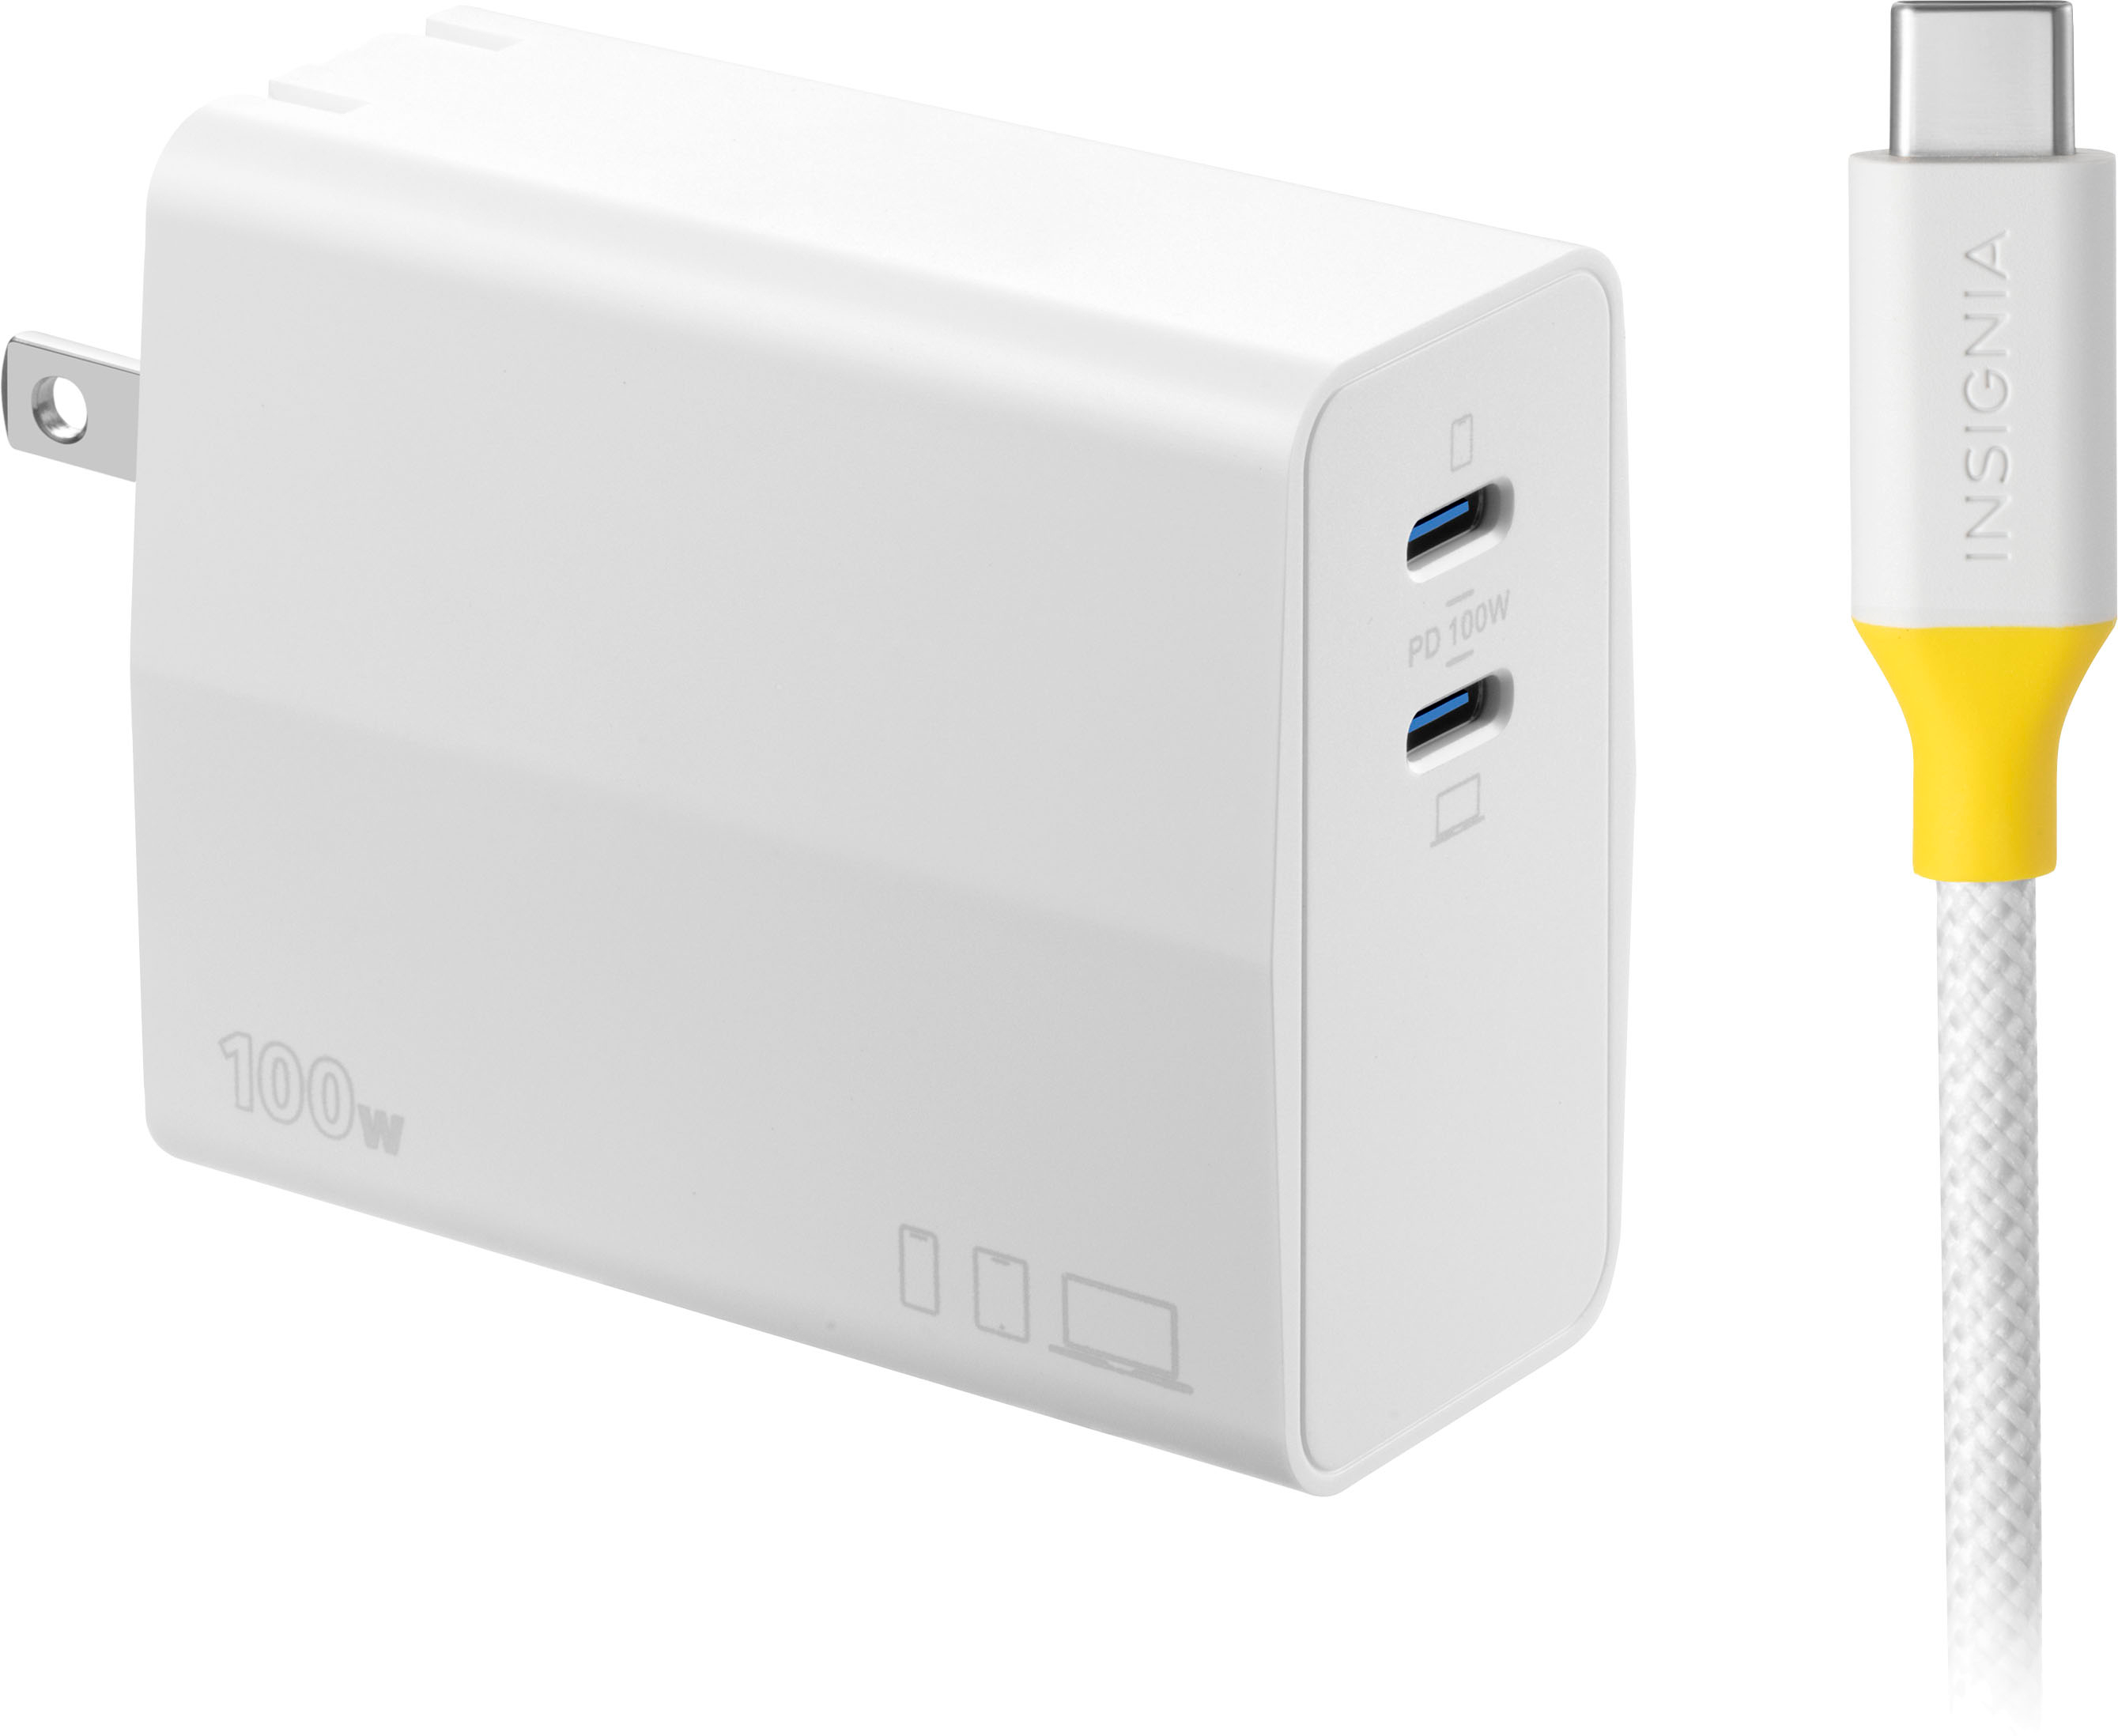 Anker Prime 100W GaN Wall Charger review